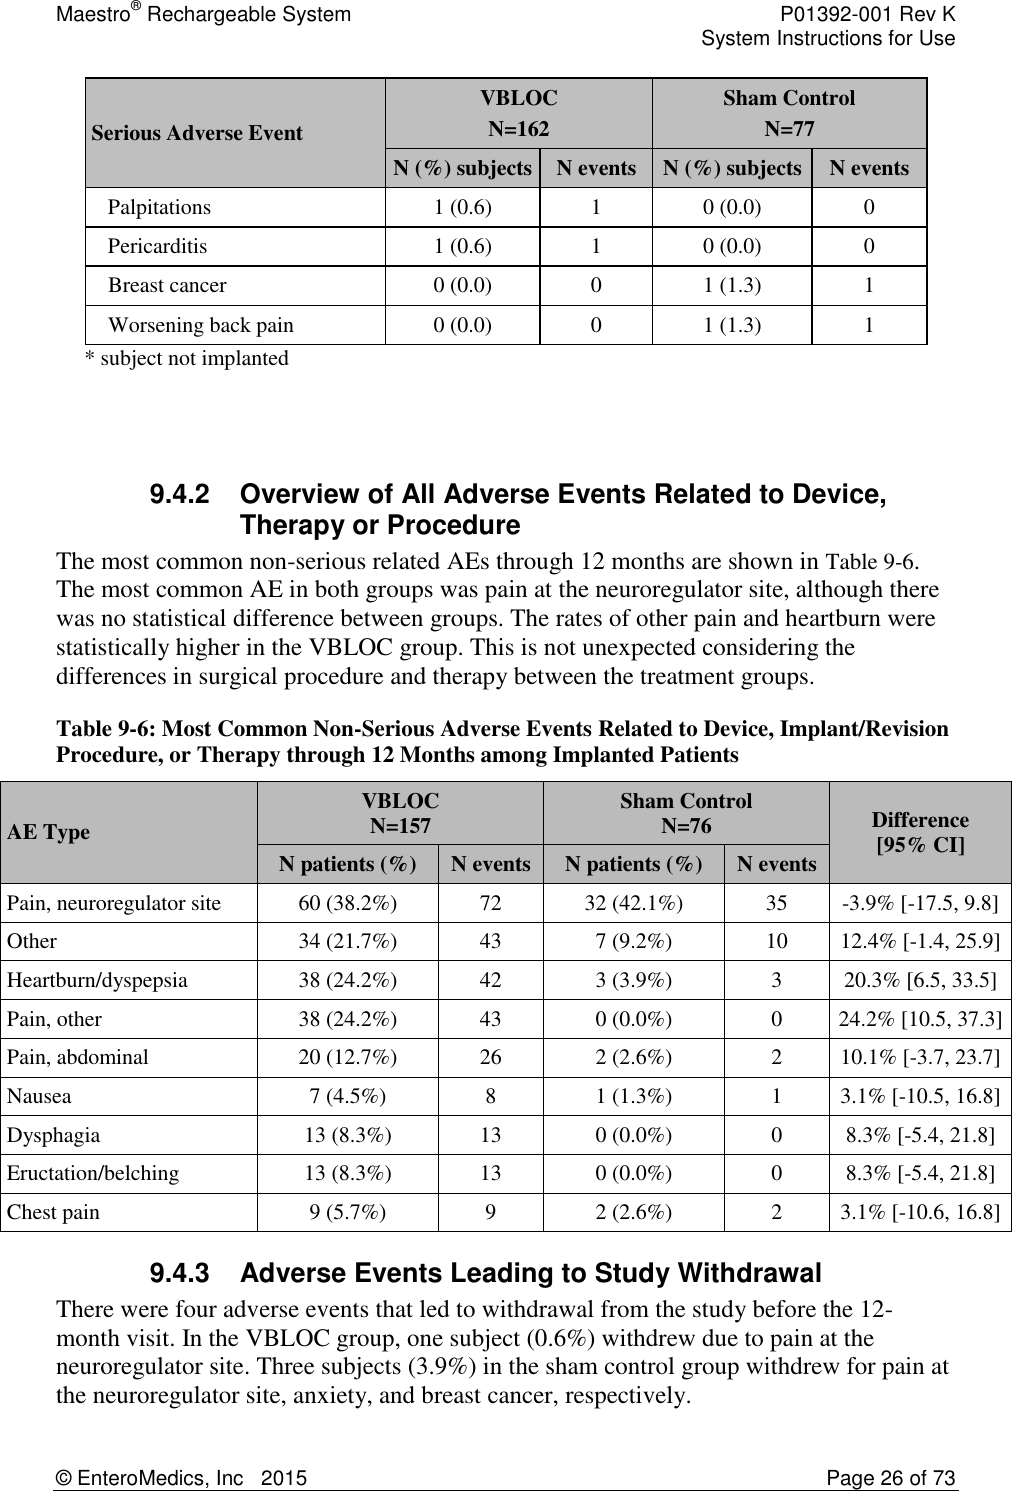 Maestro® Rechargeable System    P01392-001 Rev K     System Instructions for Use  © EnteroMedics, Inc   2015  Page 26 of 73  Serious Adverse Event VBLOC N=162 Sham Control N=77 N (%) subjects N events N (%) subjects N events    Palpitations 1 (0.6) 1 0 (0.0) 0    Pericarditis 1 (0.6) 1 0 (0.0) 0    Breast cancer 0 (0.0) 0 1 (1.3) 1    Worsening back pain 0 (0.0) 0 1 (1.3) 1 * subject not implanted   9.4.2  Overview of All Adverse Events Related to Device, Therapy or Procedure The most common non-serious related AEs through 12 months are shown in Table 9-6. The most common AE in both groups was pain at the neuroregulator site, although there was no statistical difference between groups. The rates of other pain and heartburn were statistically higher in the VBLOC group. This is not unexpected considering the differences in surgical procedure and therapy between the treatment groups. Table 9-6: Most Common Non-Serious Adverse Events Related to Device, Implant/Revision Procedure, or Therapy through 12 Months among Implanted Patients AE Type VBLOC N=157 Sham Control N=76 Difference [95% CI] N patients (%) N events N patients (%) N events Pain, neuroregulator site 60 (38.2%) 72 32 (42.1%) 35 -3.9% [-17.5, 9.8] Other 34 (21.7%) 43 7 (9.2%) 10 12.4% [-1.4, 25.9] Heartburn/dyspepsia 38 (24.2%) 42 3 (3.9%) 3 20.3% [6.5, 33.5] Pain, other 38 (24.2%) 43 0 (0.0%) 0 24.2% [10.5, 37.3] Pain, abdominal 20 (12.7%) 26 2 (2.6%) 2 10.1% [-3.7, 23.7] Nausea 7 (4.5%) 8 1 (1.3%) 1 3.1% [-10.5, 16.8] Dysphagia 13 (8.3%) 13 0 (0.0%) 0 8.3% [-5.4, 21.8] Eructation/belching 13 (8.3%) 13 0 (0.0%) 0 8.3% [-5.4, 21.8] Chest pain 9 (5.7%) 9 2 (2.6%) 2 3.1% [-10.6, 16.8] 9.4.3  Adverse Events Leading to Study Withdrawal There were four adverse events that led to withdrawal from the study before the 12-month visit. In the VBLOC group, one subject (0.6%) withdrew due to pain at the neuroregulator site. Three subjects (3.9%) in the sham control group withdrew for pain at the neuroregulator site, anxiety, and breast cancer, respectively. 